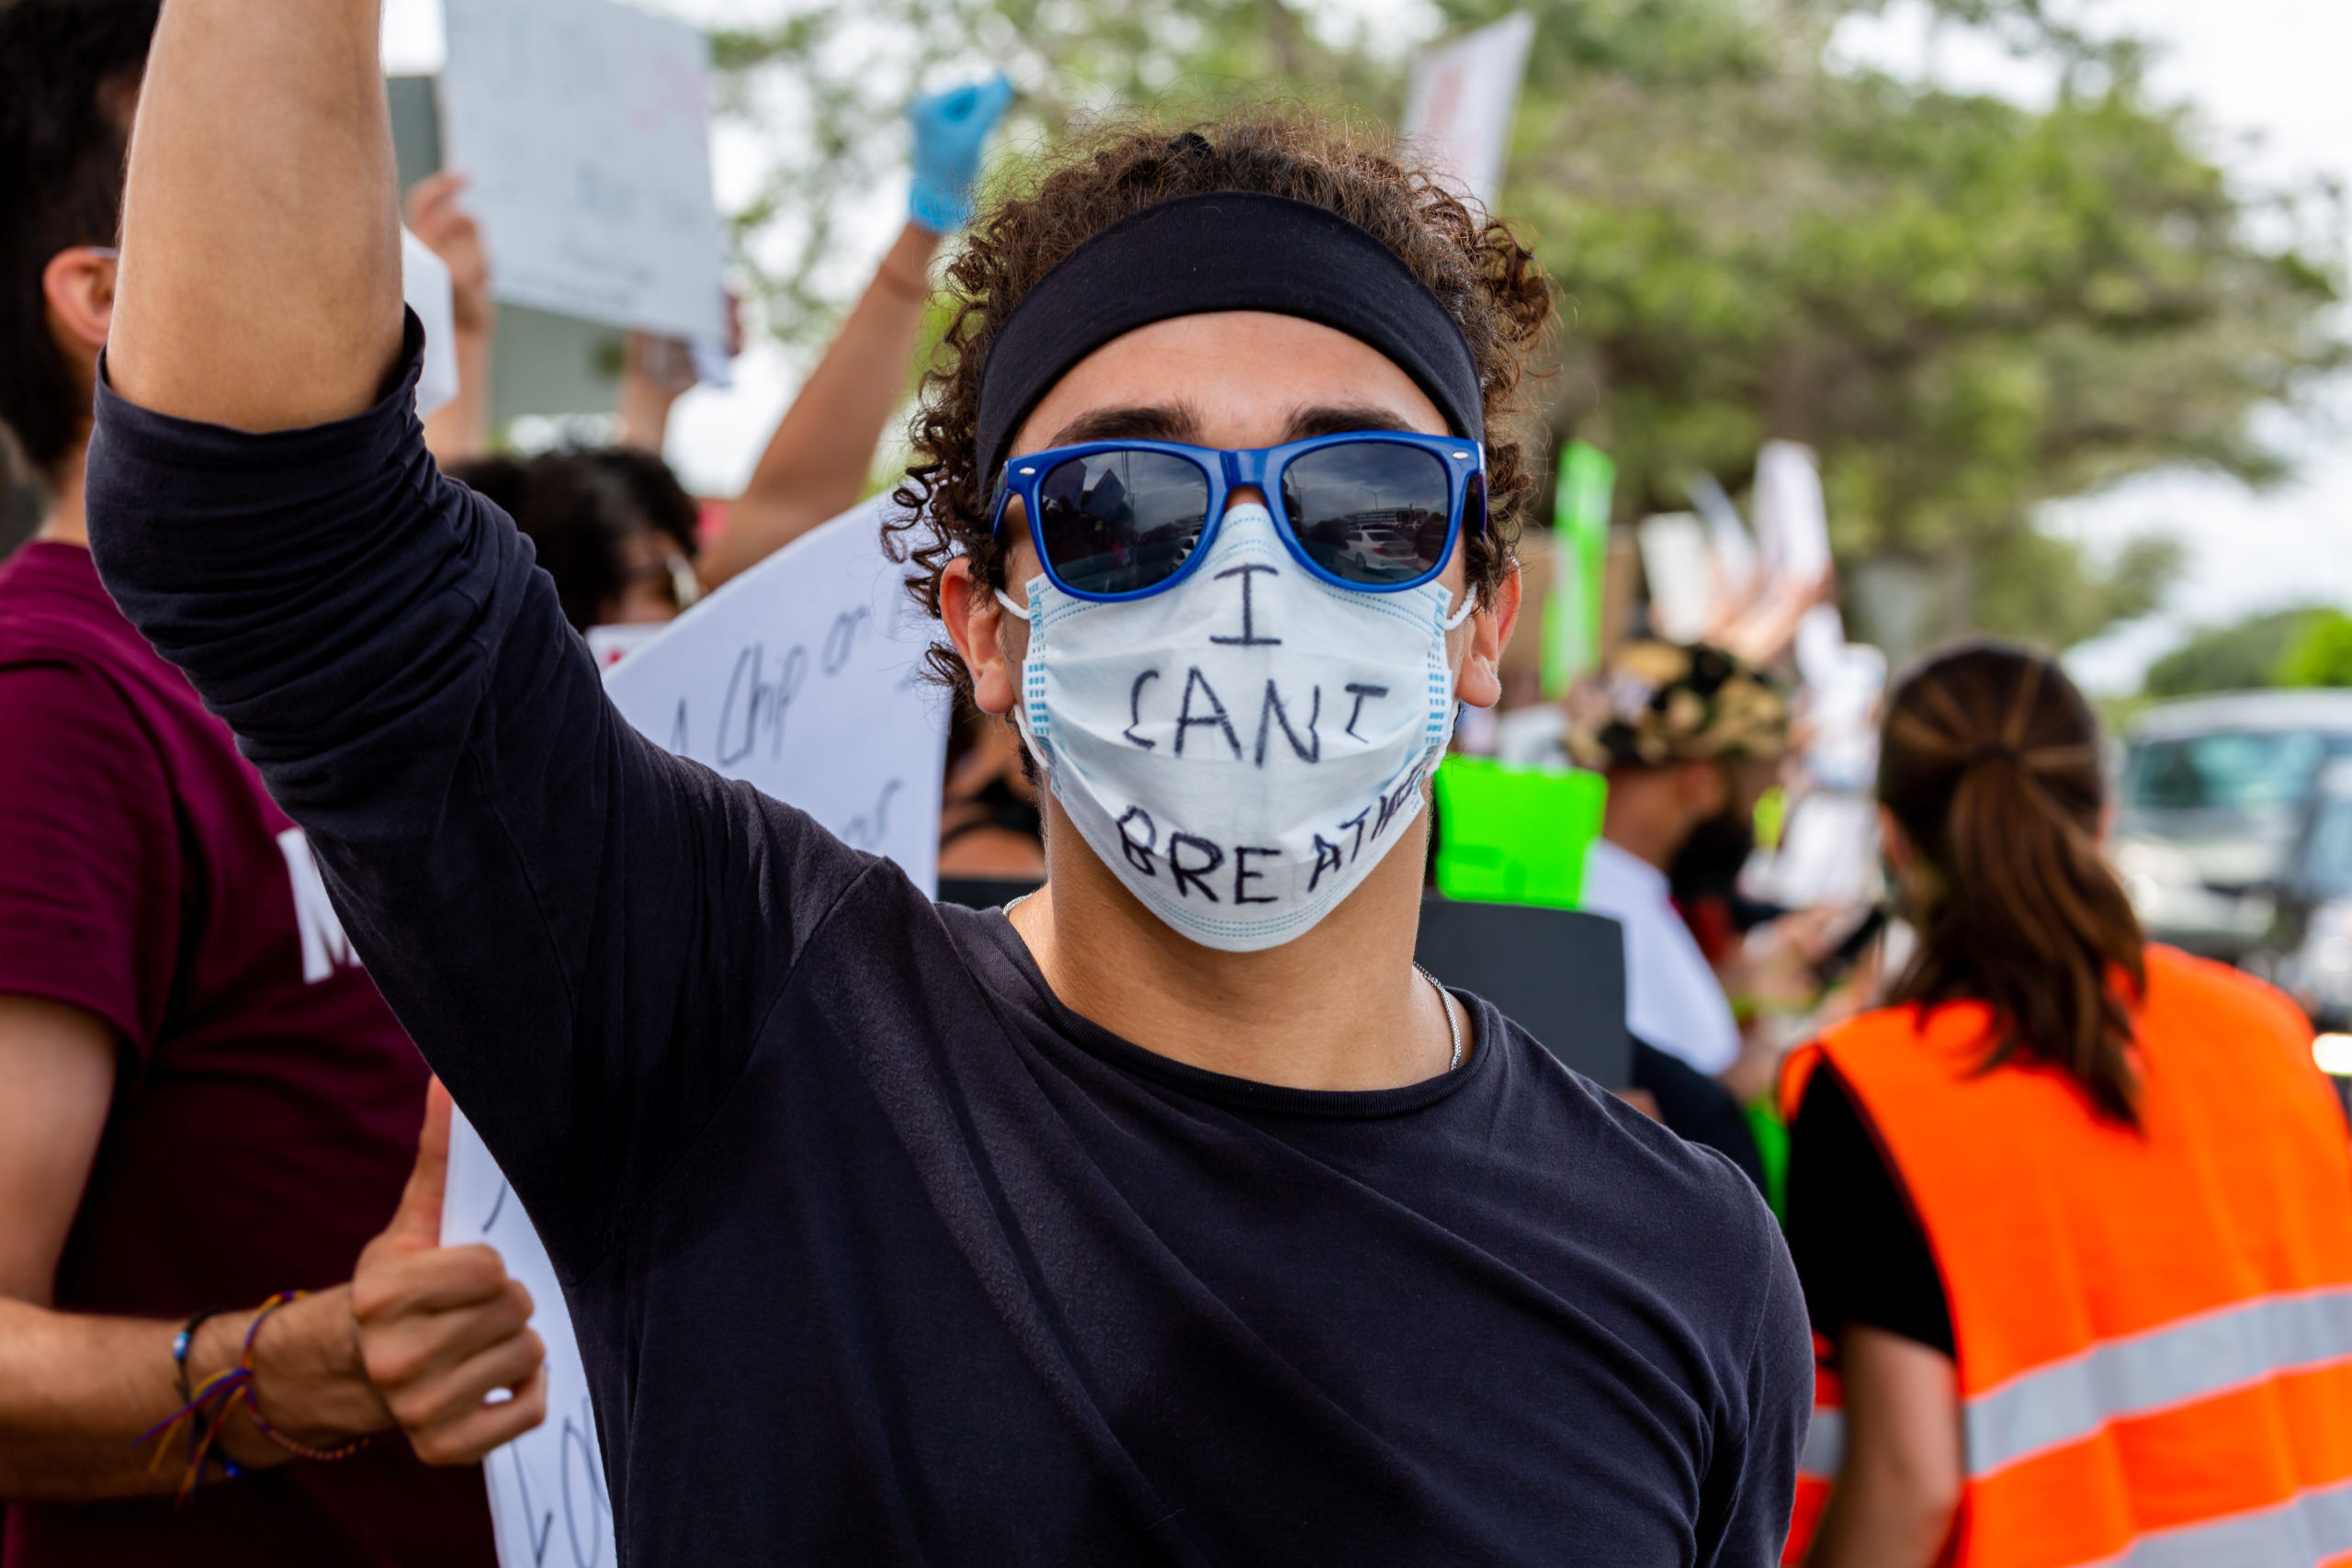 A man wearing sunglasses and a mask with the phrase "I Can't Breathe" in protest against the death in Minneapolis police custody of African-American man George Floyd at Coral Springs, Florida.